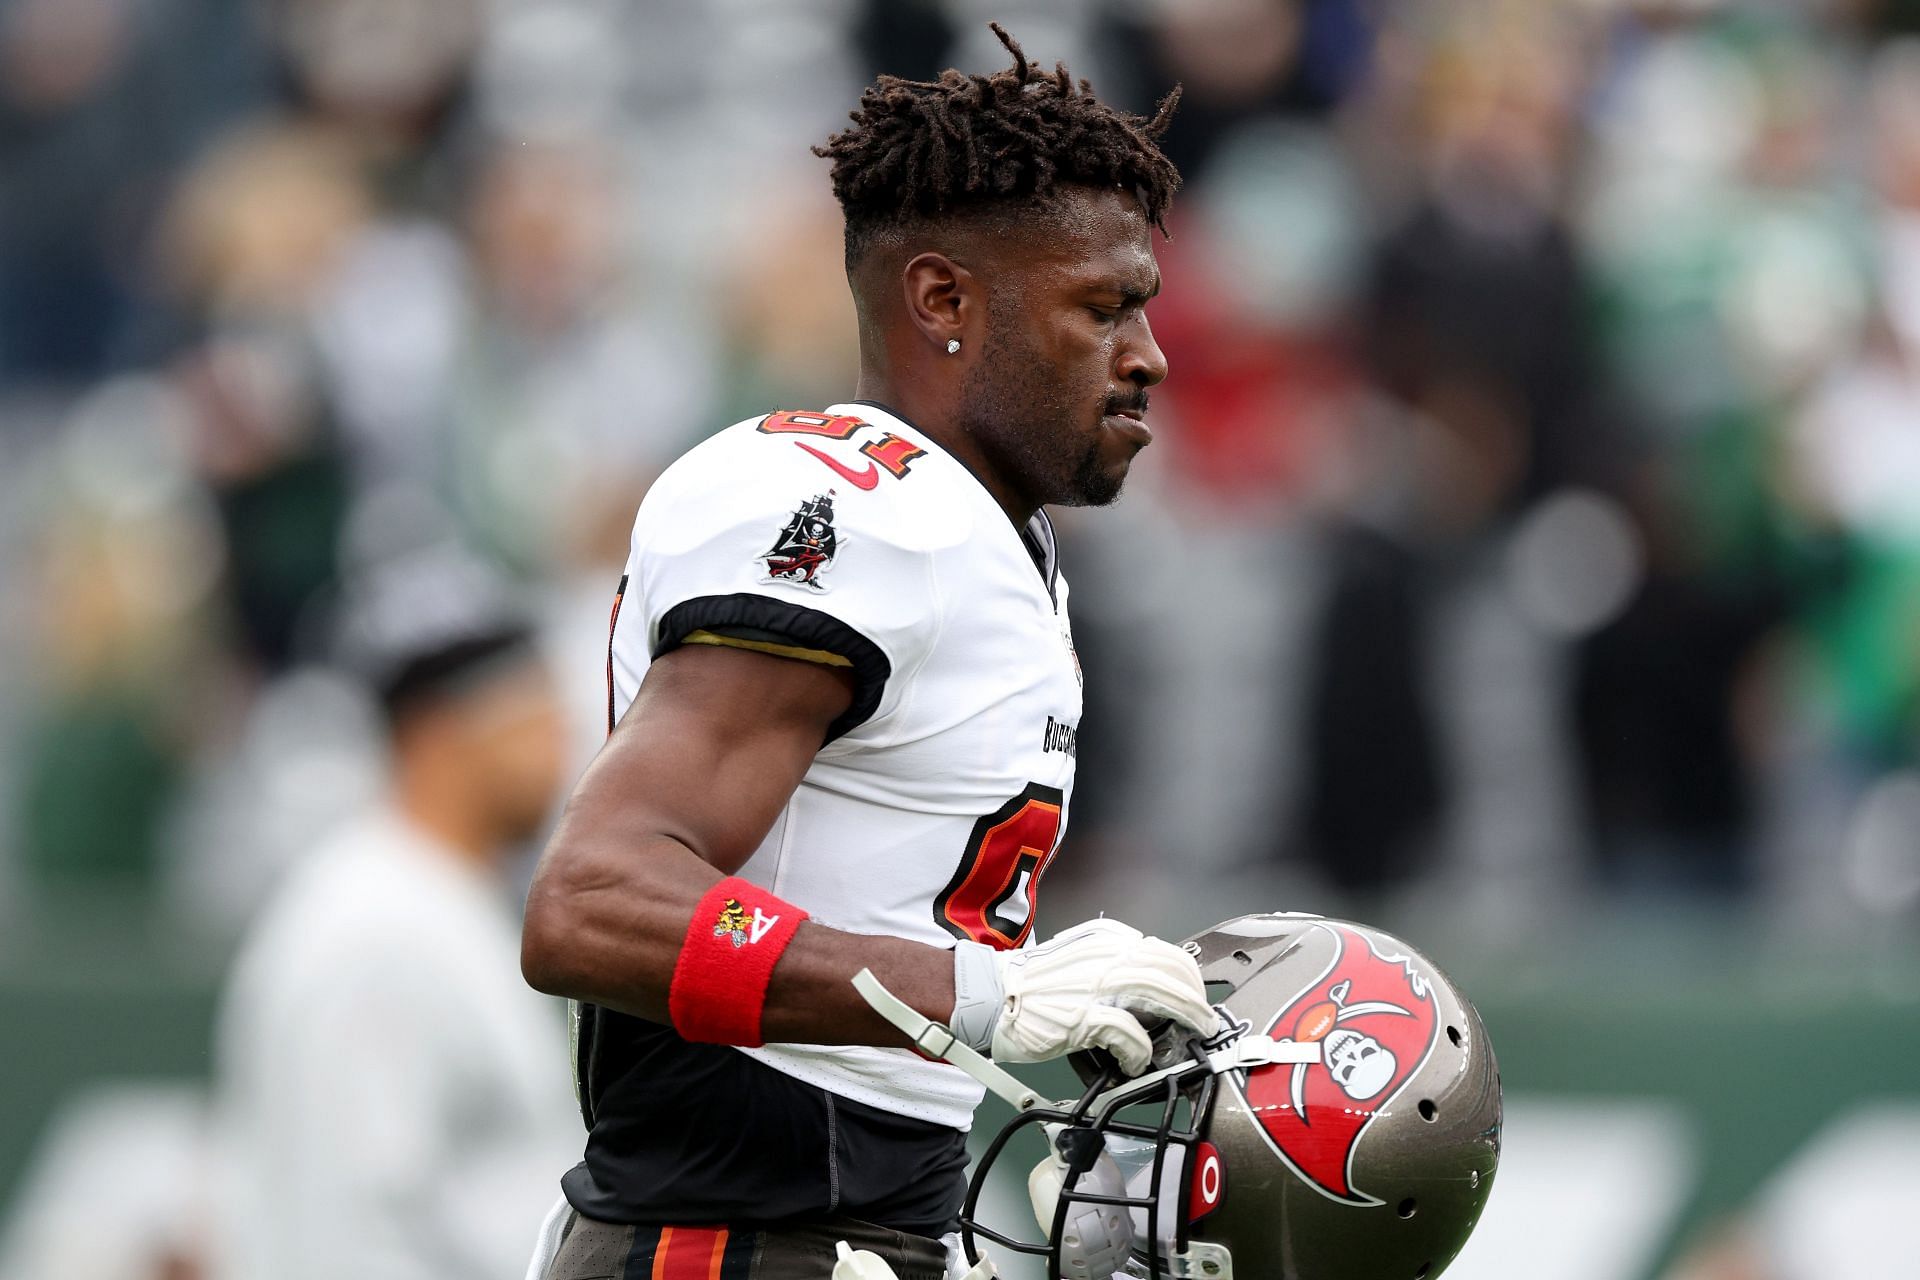 Antonio Brown blew up with the Buccaneers